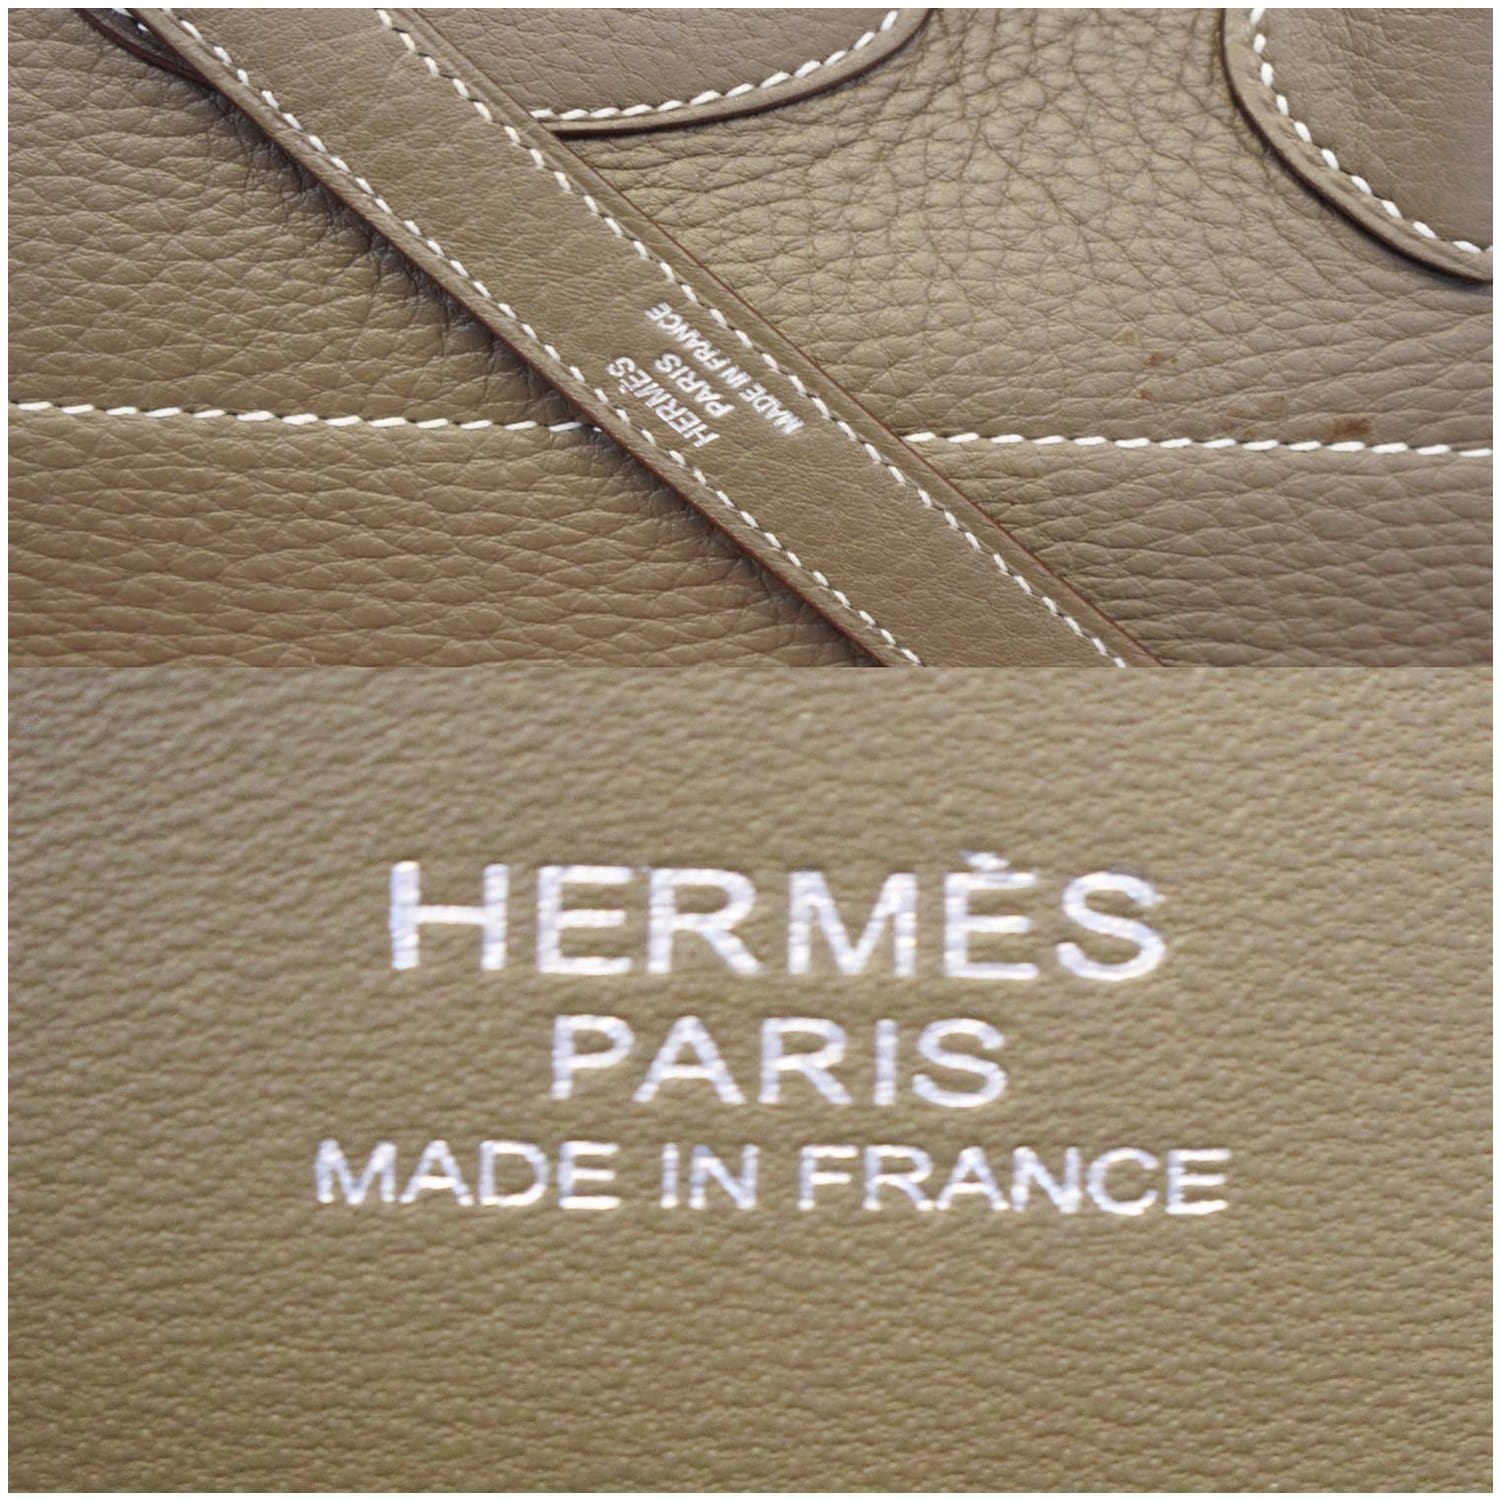 The Hermès Bolide: Beauty in Simplicity